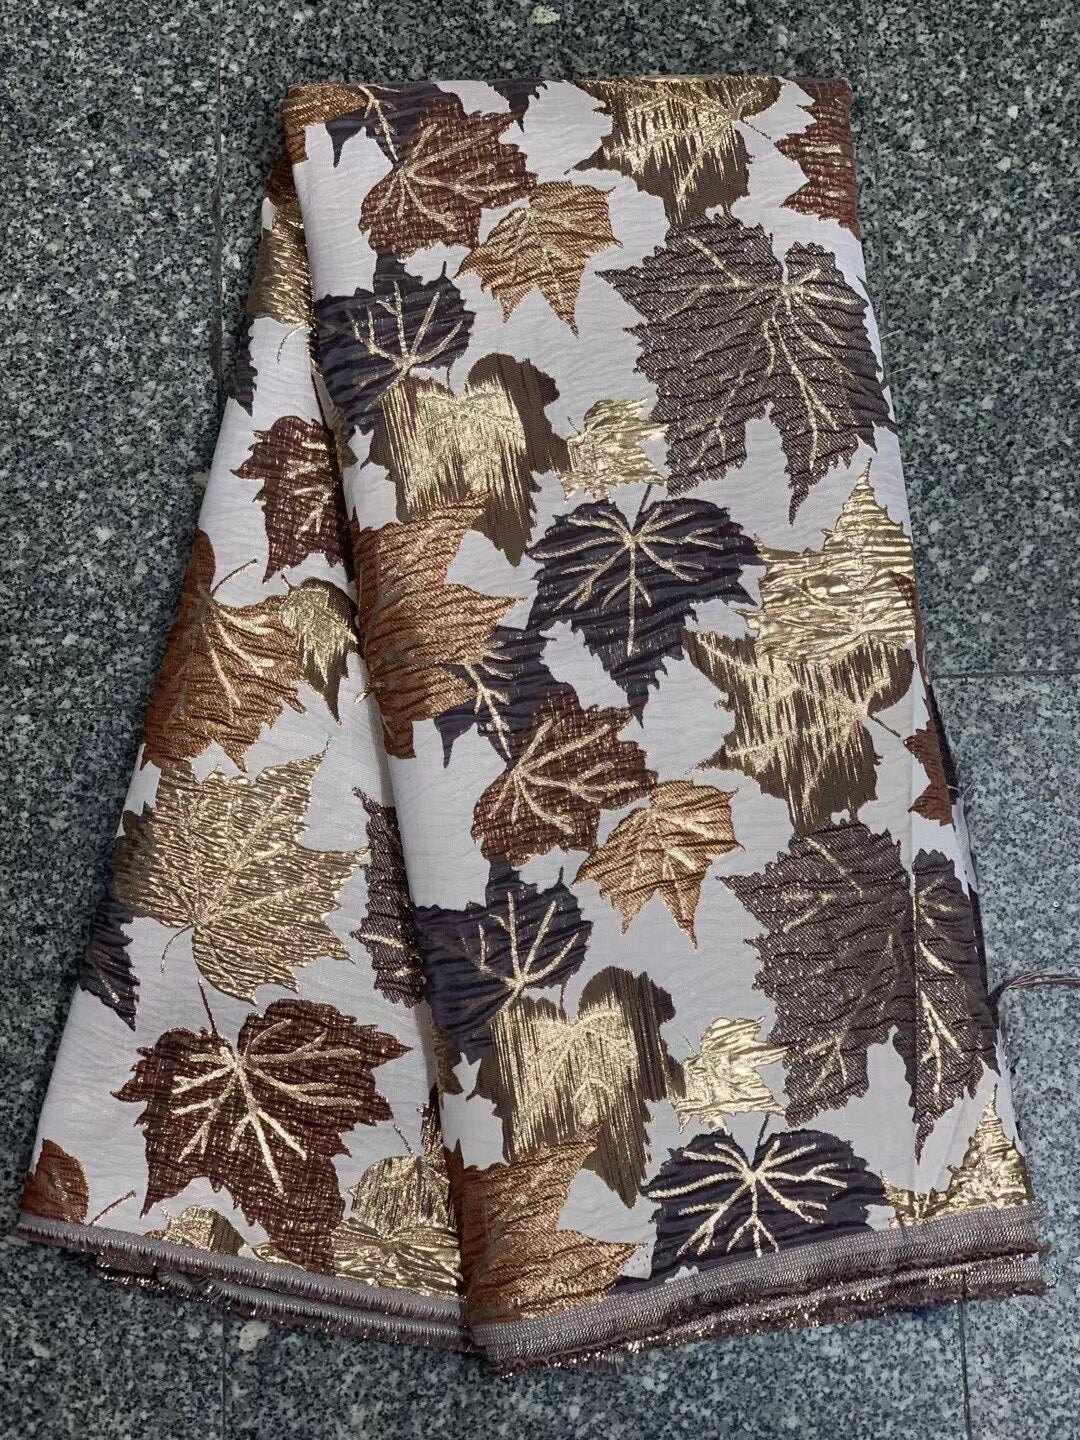 5 YARDS / 8 COLORS / Autumn Leaves Floral Viscose Jacquard Brocade Woven Fashion Jacket Dress Fabric